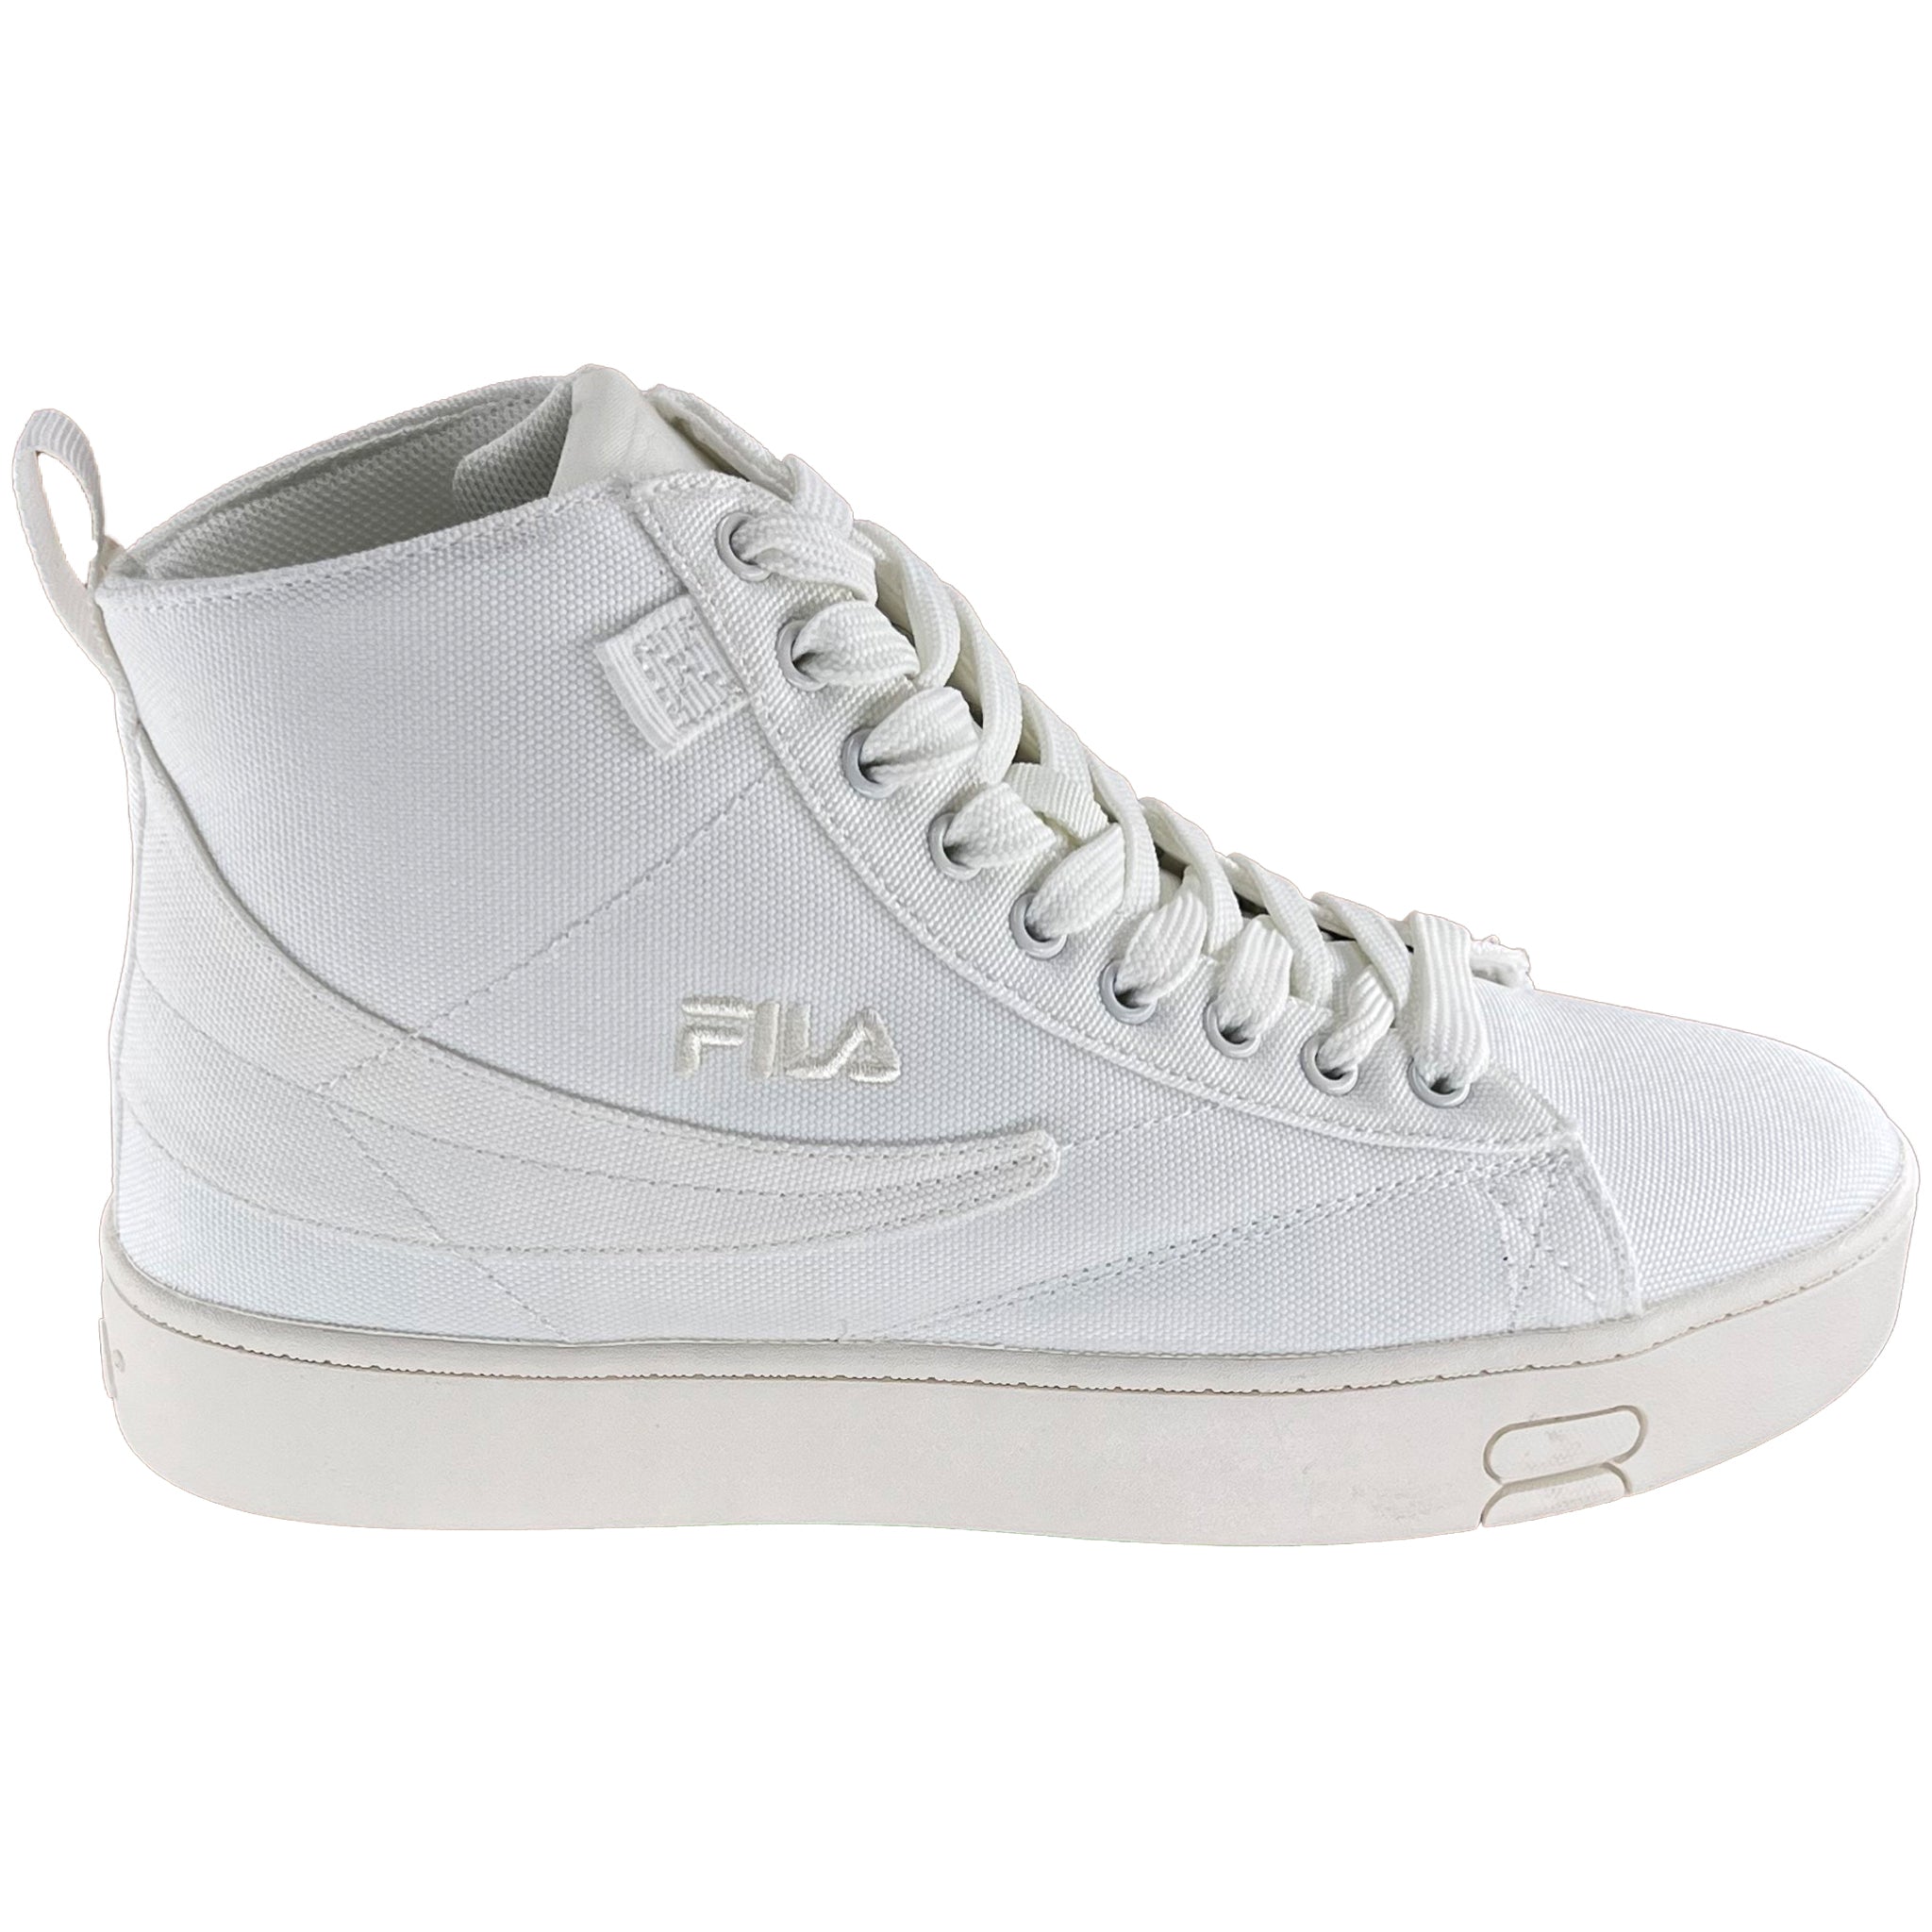 Fila Women's Gennaio Creamy Off-White Canvas Casual Shoes – That Shoe Store More